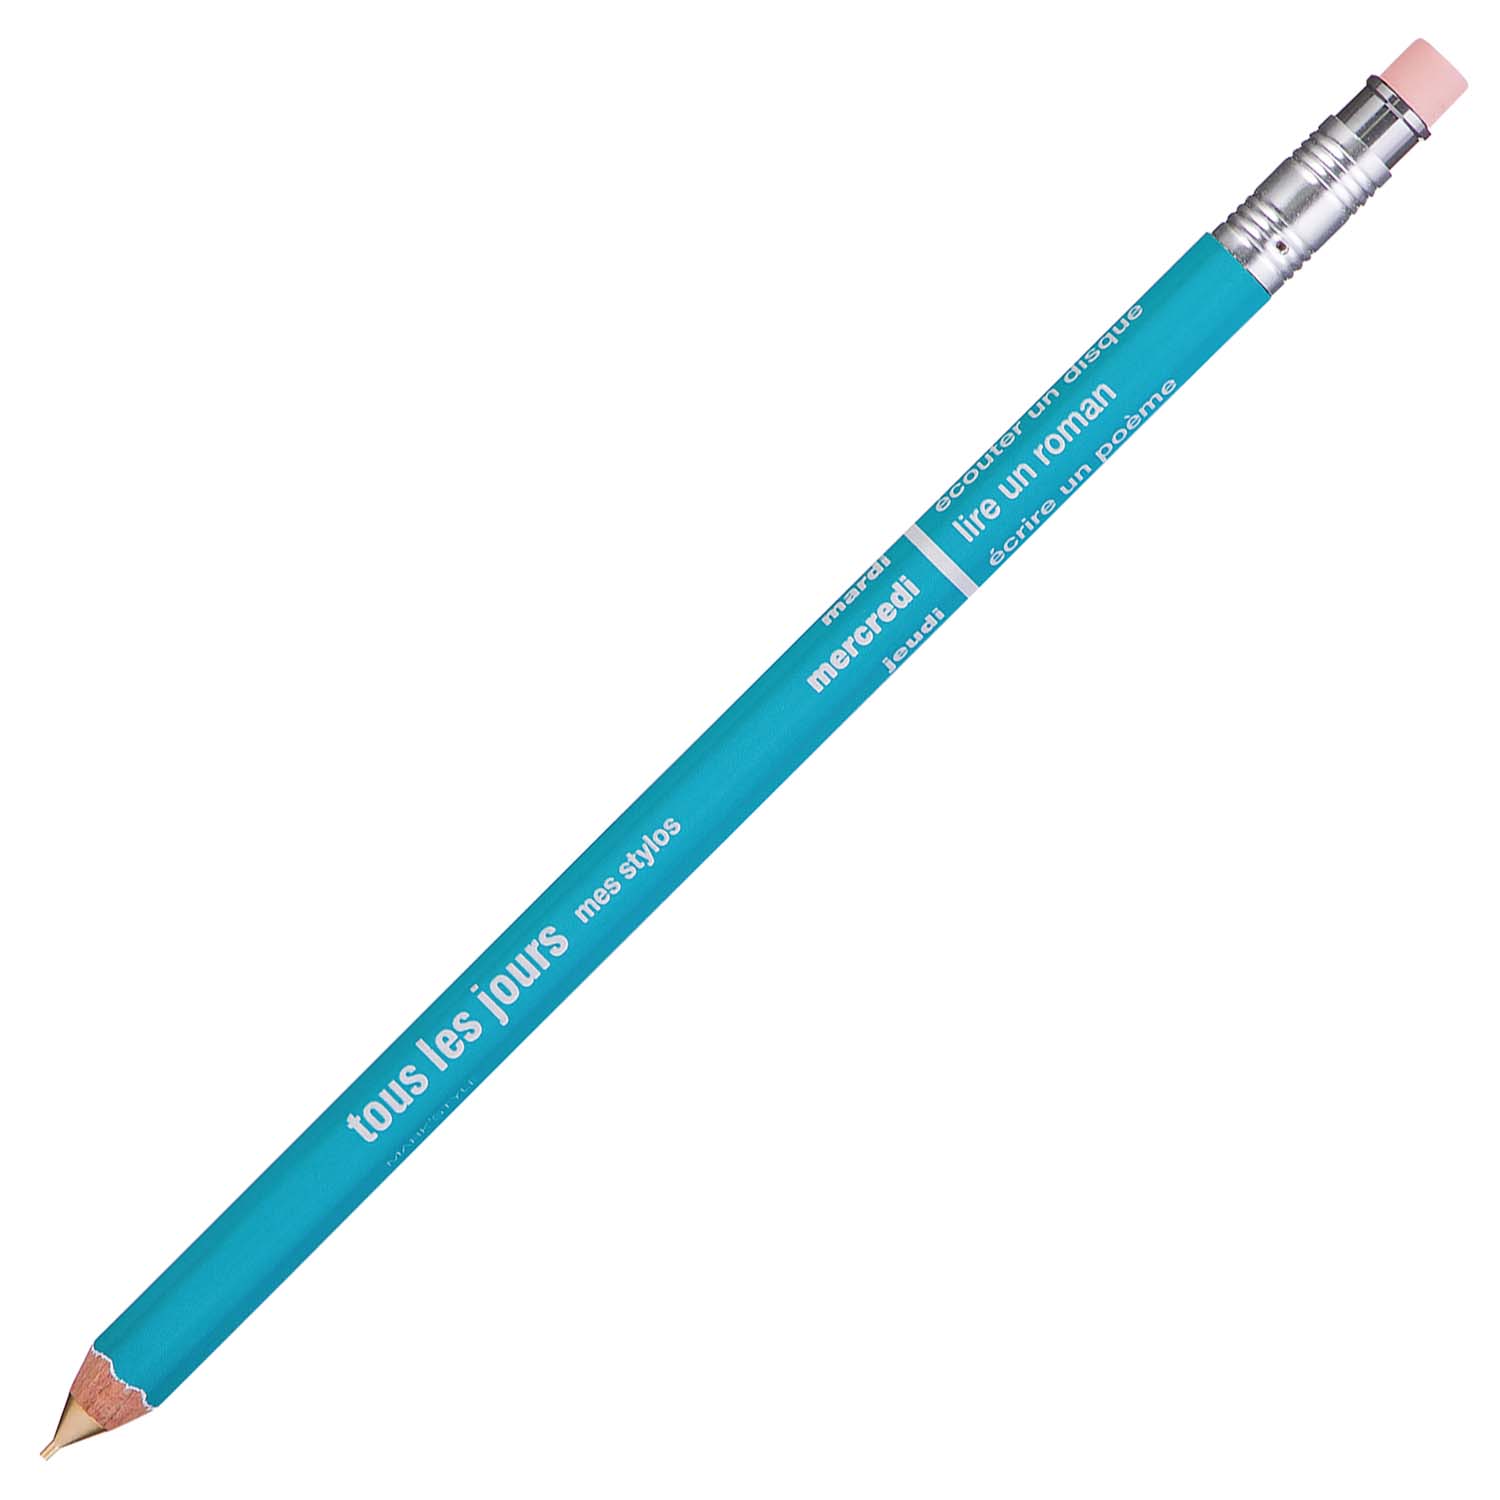 Days Mark's Mechanical Pencil with Eraser DAY-SH2-TQ Turquoise